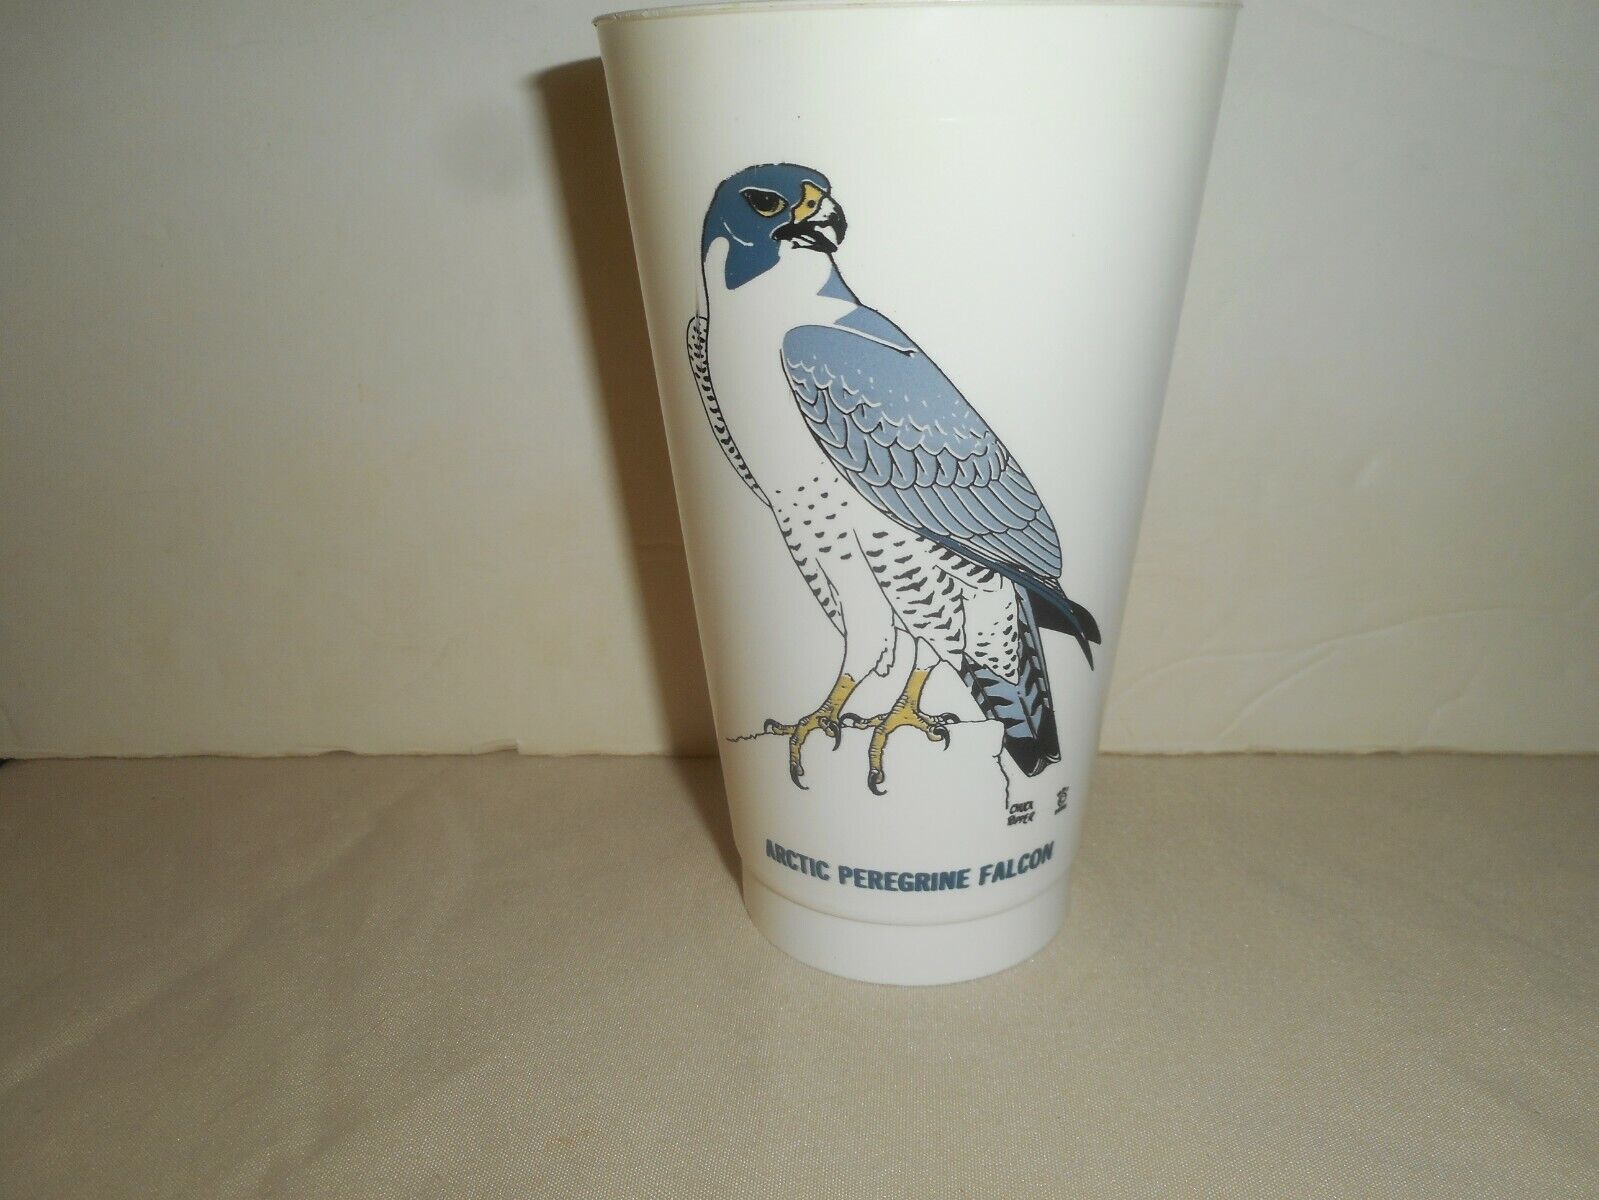 7 Eleven ARCTIC PEREGRINE FALCON Slurpee Cup SAVE A LIVING THING Series 1974